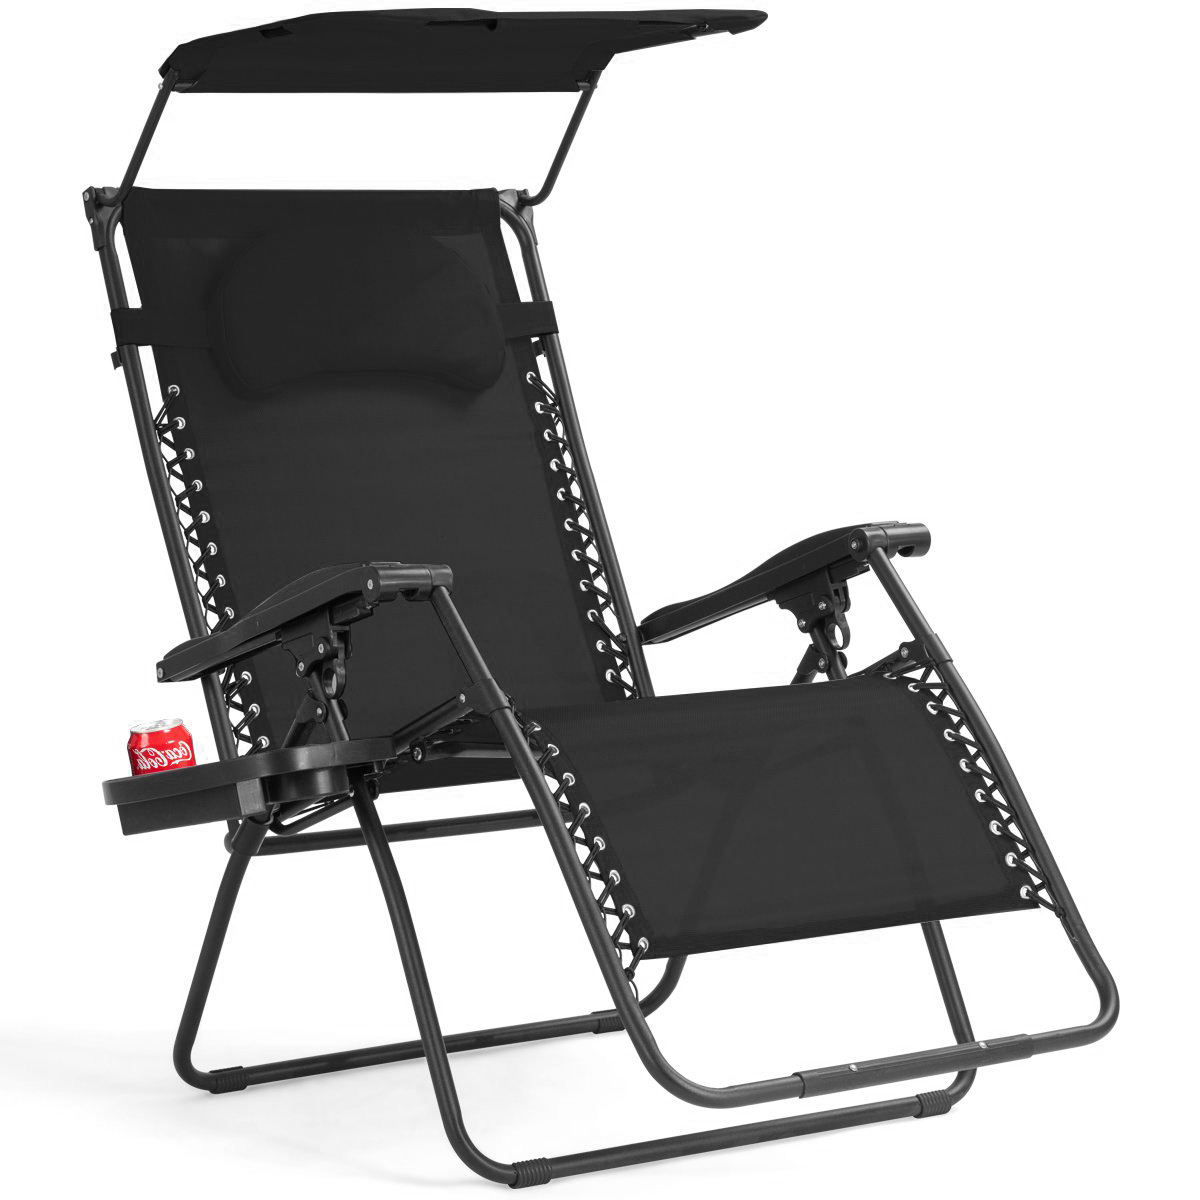 Folding Recliner Zero Gravity Lounge Chair W/ Shade Canopy Cup Holder Black